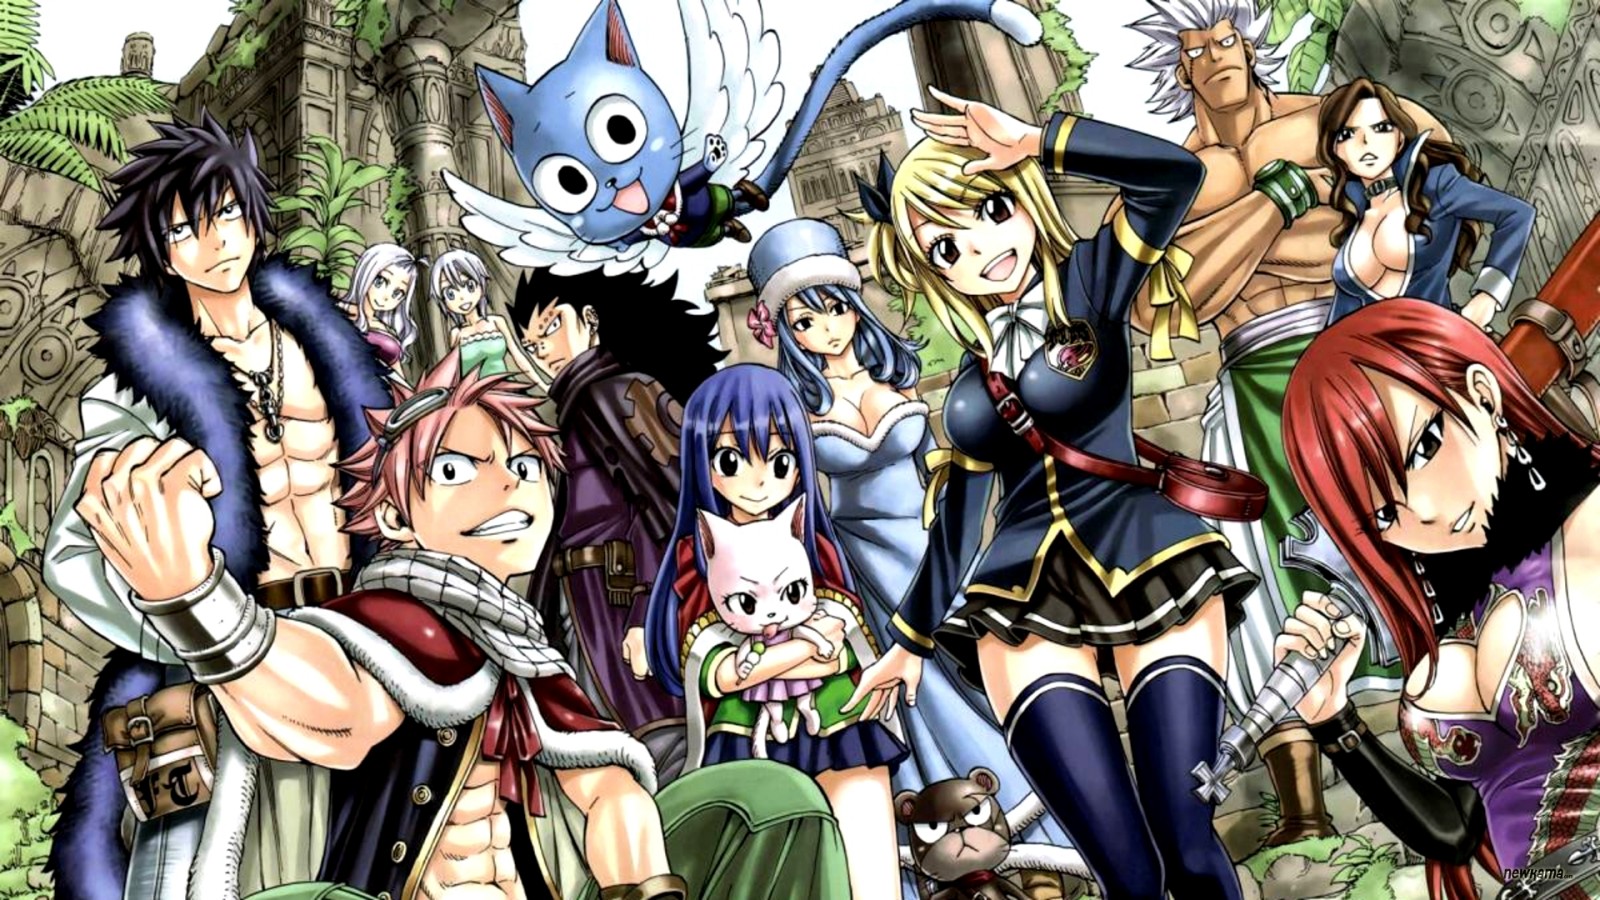 Fairy Tail Wallpaper HD Background Image Art